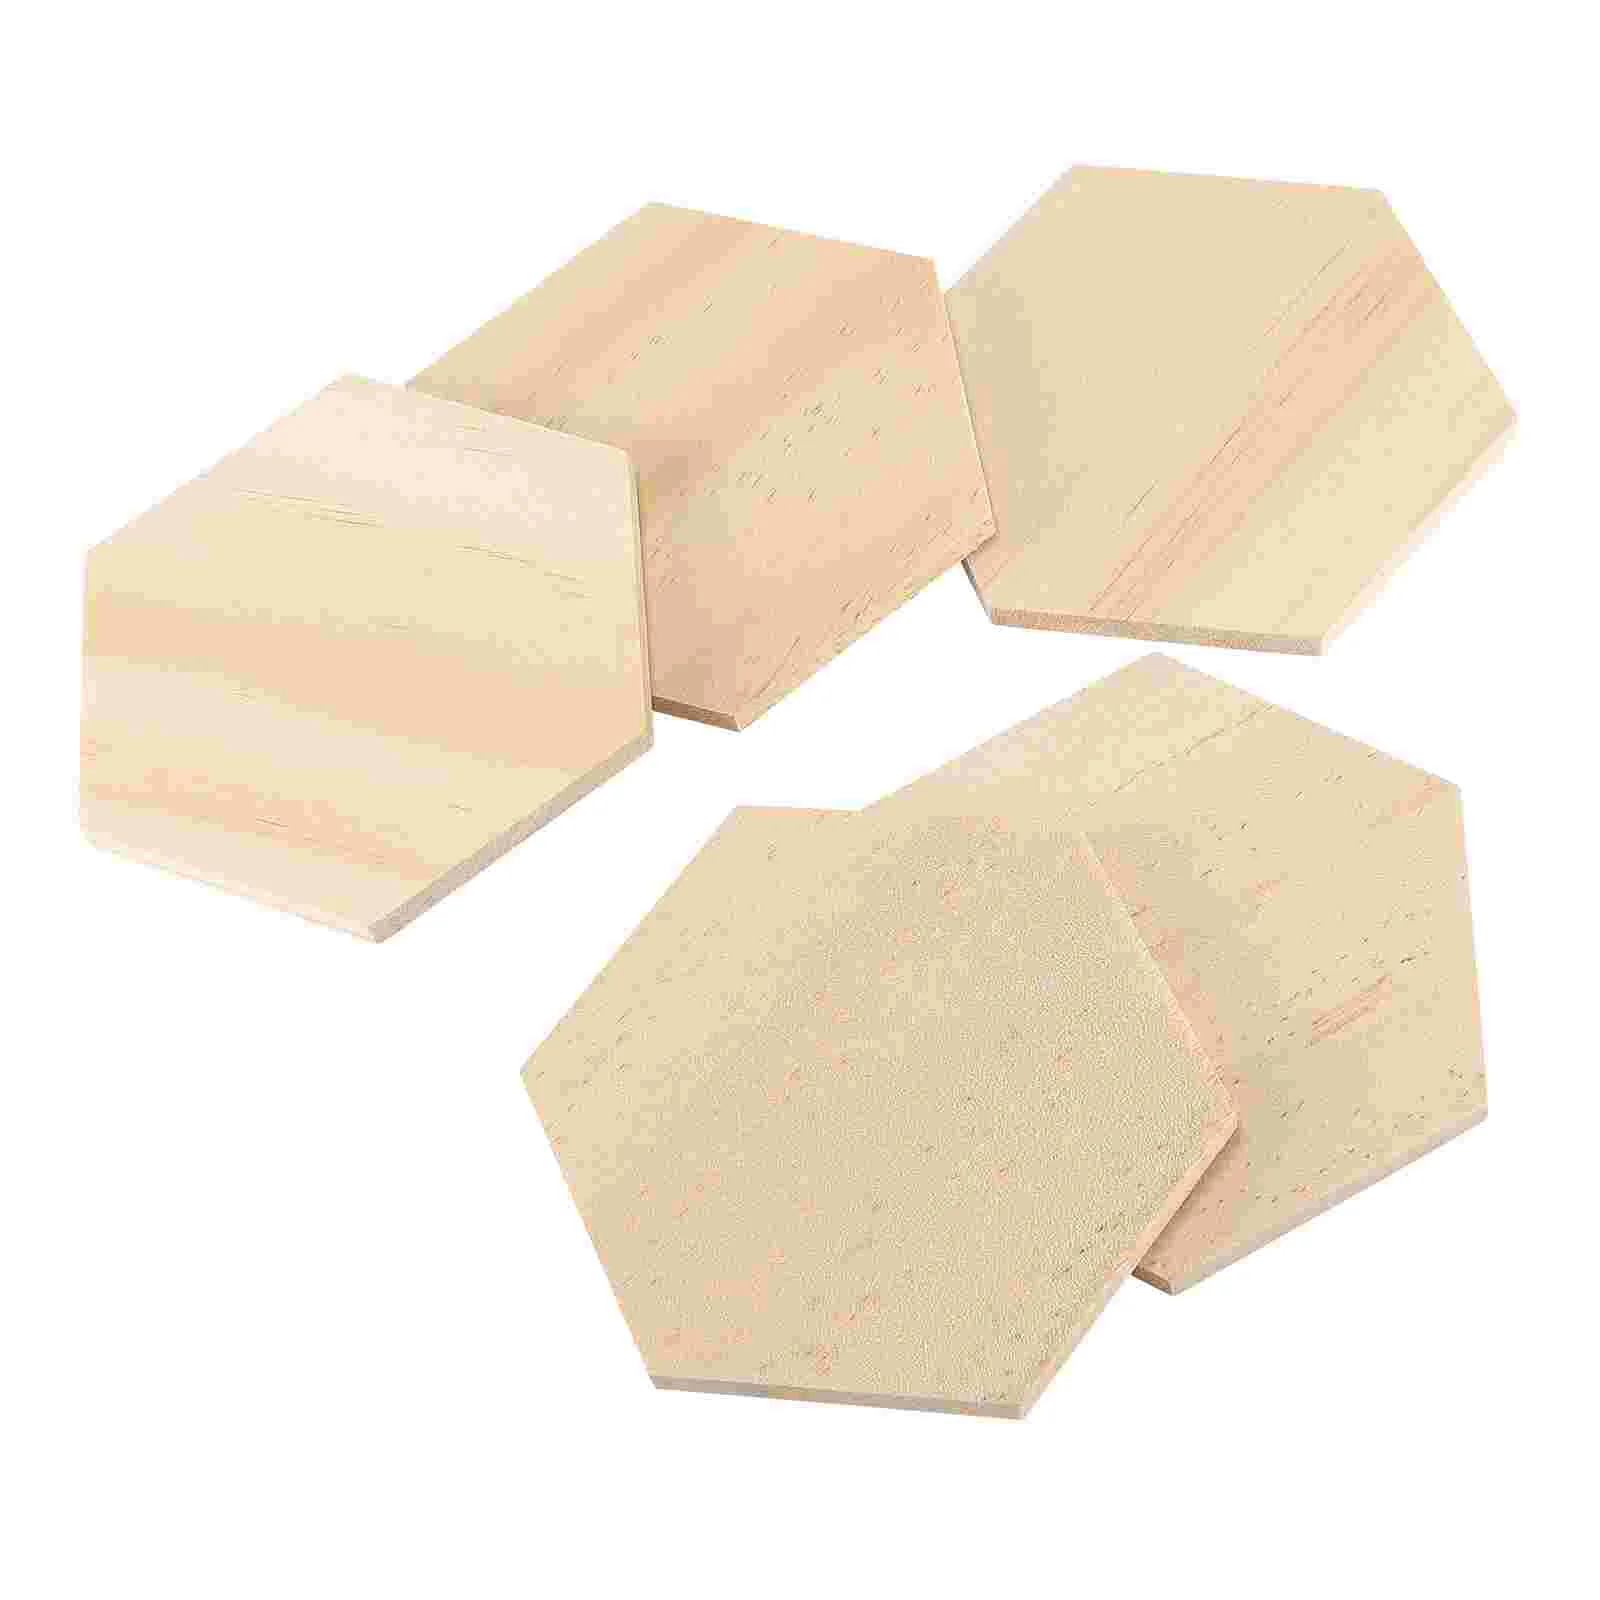 

Healifty 25pcs 9CM DIY Wood Hexagon Cutouts Wooden Chips Wood Slices Craft Supplies for Home Decoration Embellishments